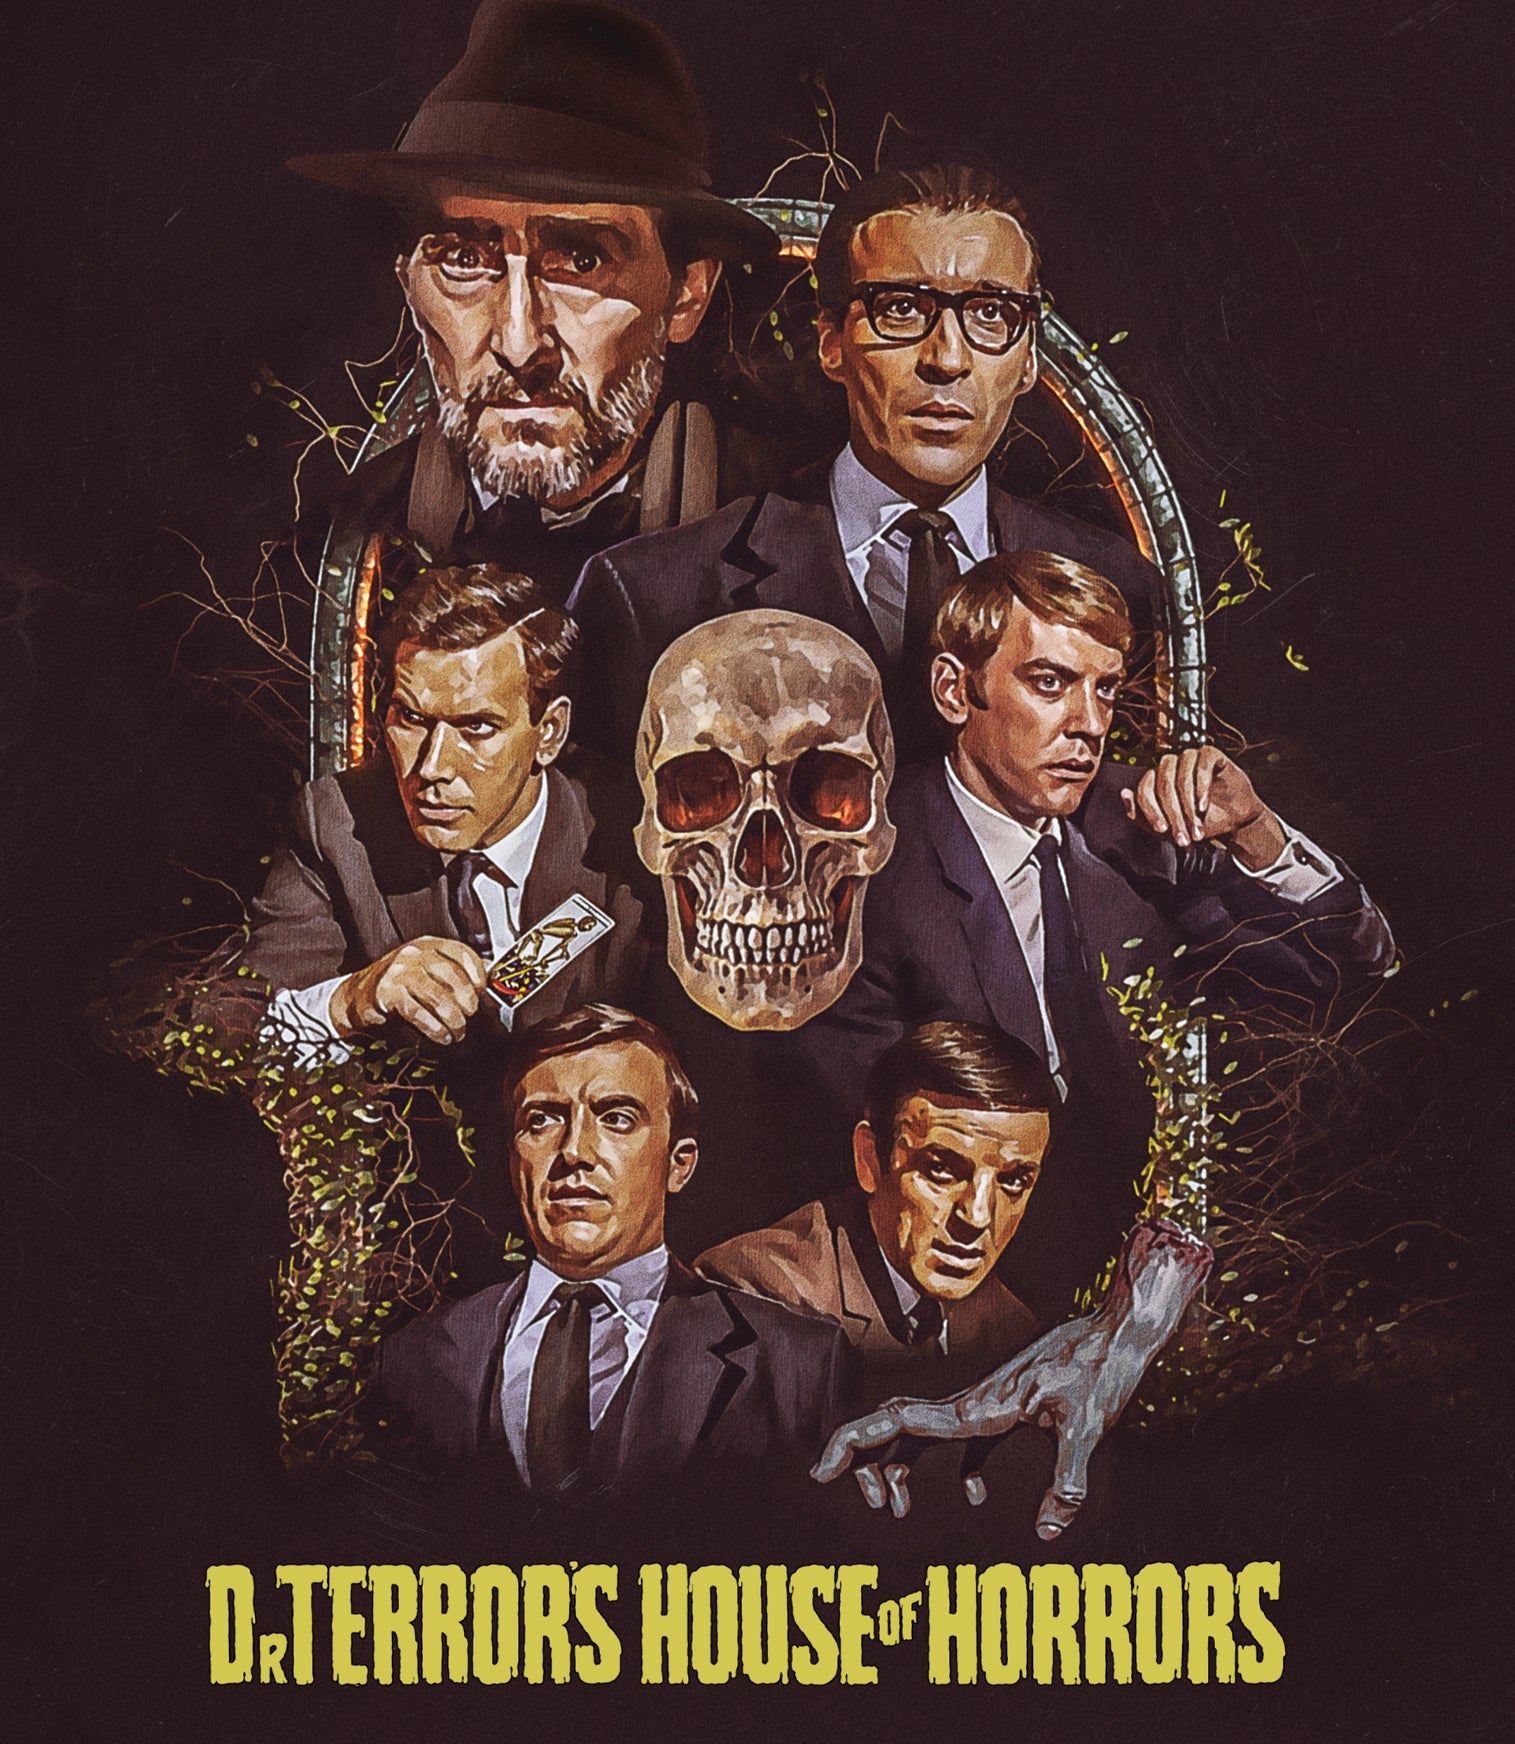 DR TERROR'S HOUSE OF HORRORS (LIMITED EDITION) 4K UHD/BLU-RAY